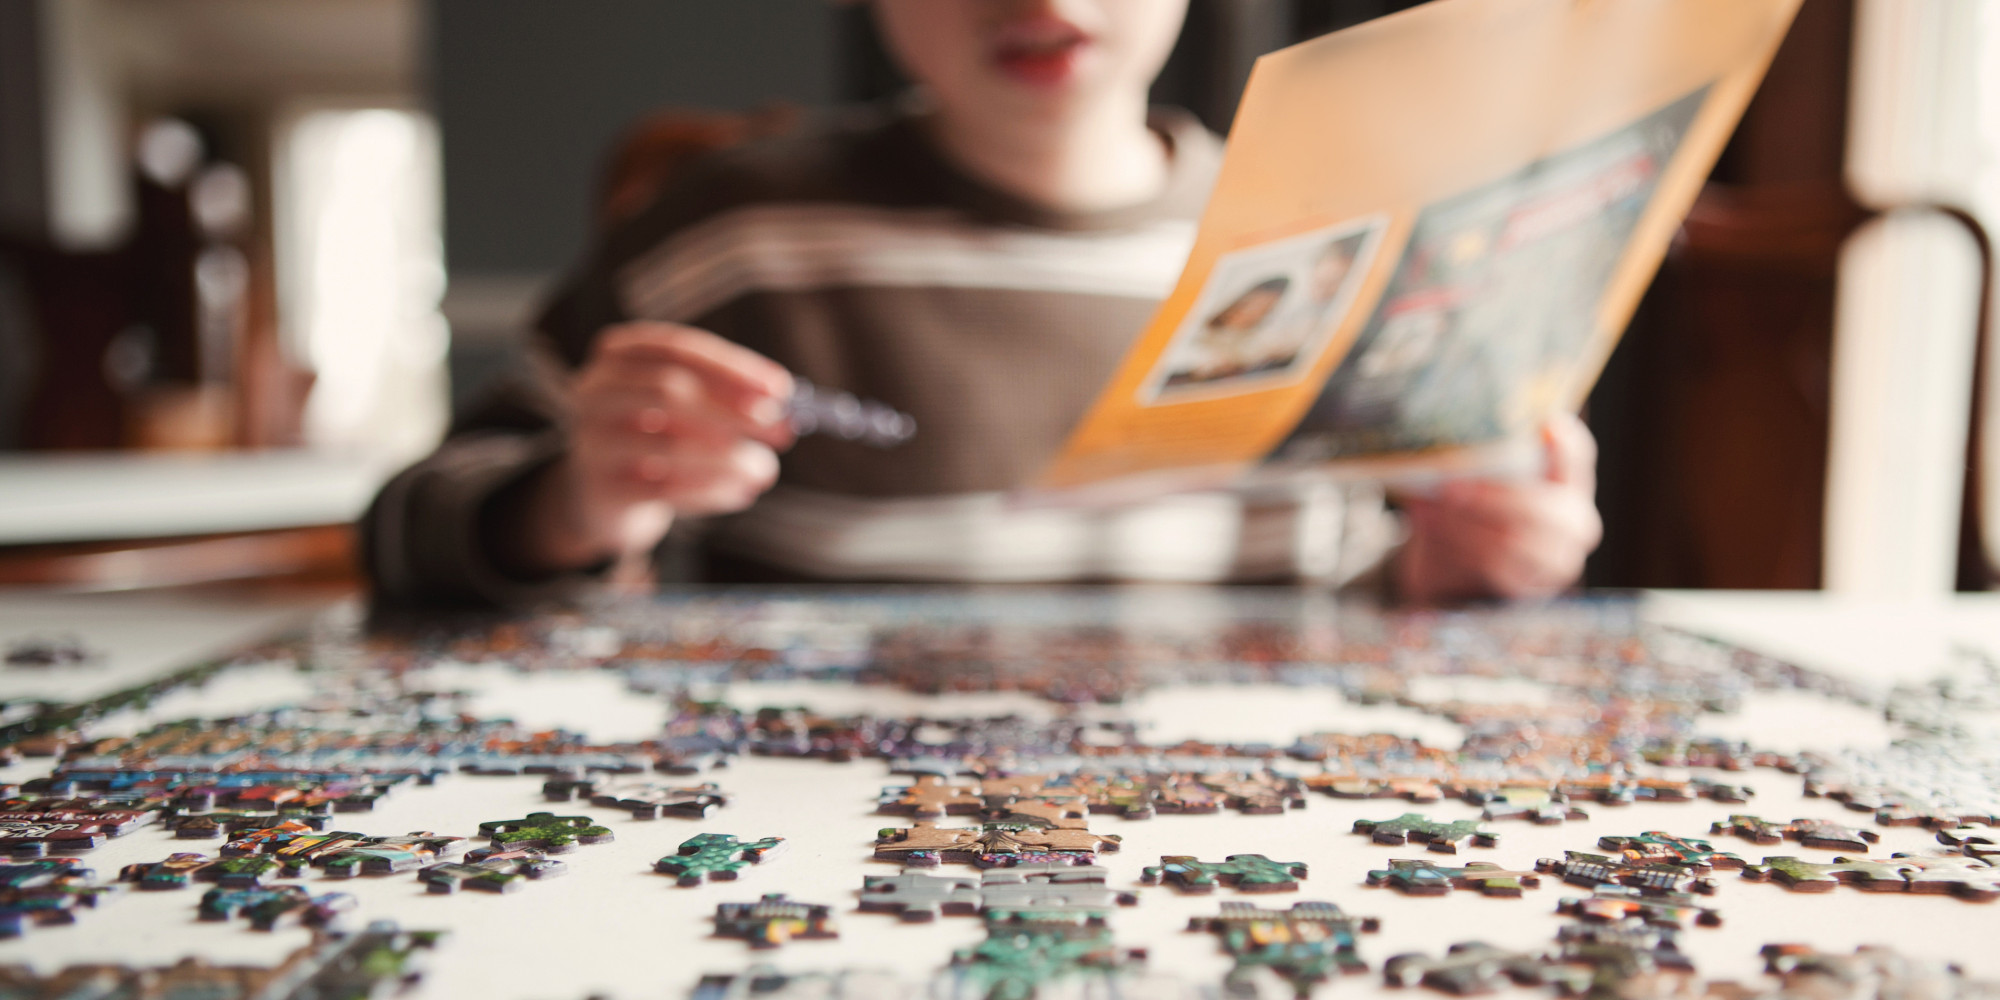 Importance of Doing Puzzles With Your Kids | HuffPost